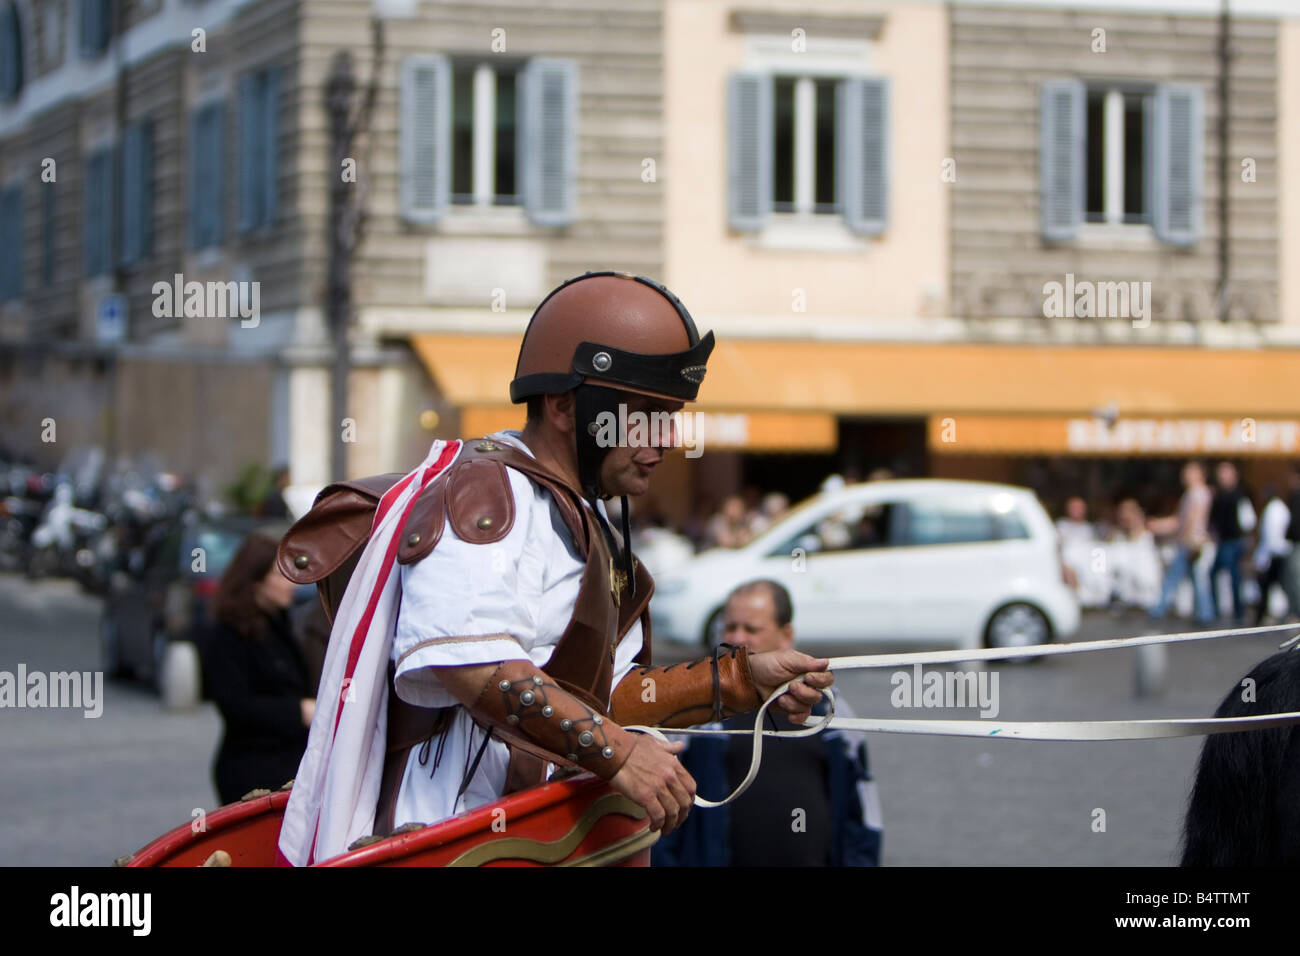 Centurion on a horse in the Piazza del Popolo in Rome, Italy Stock Photo